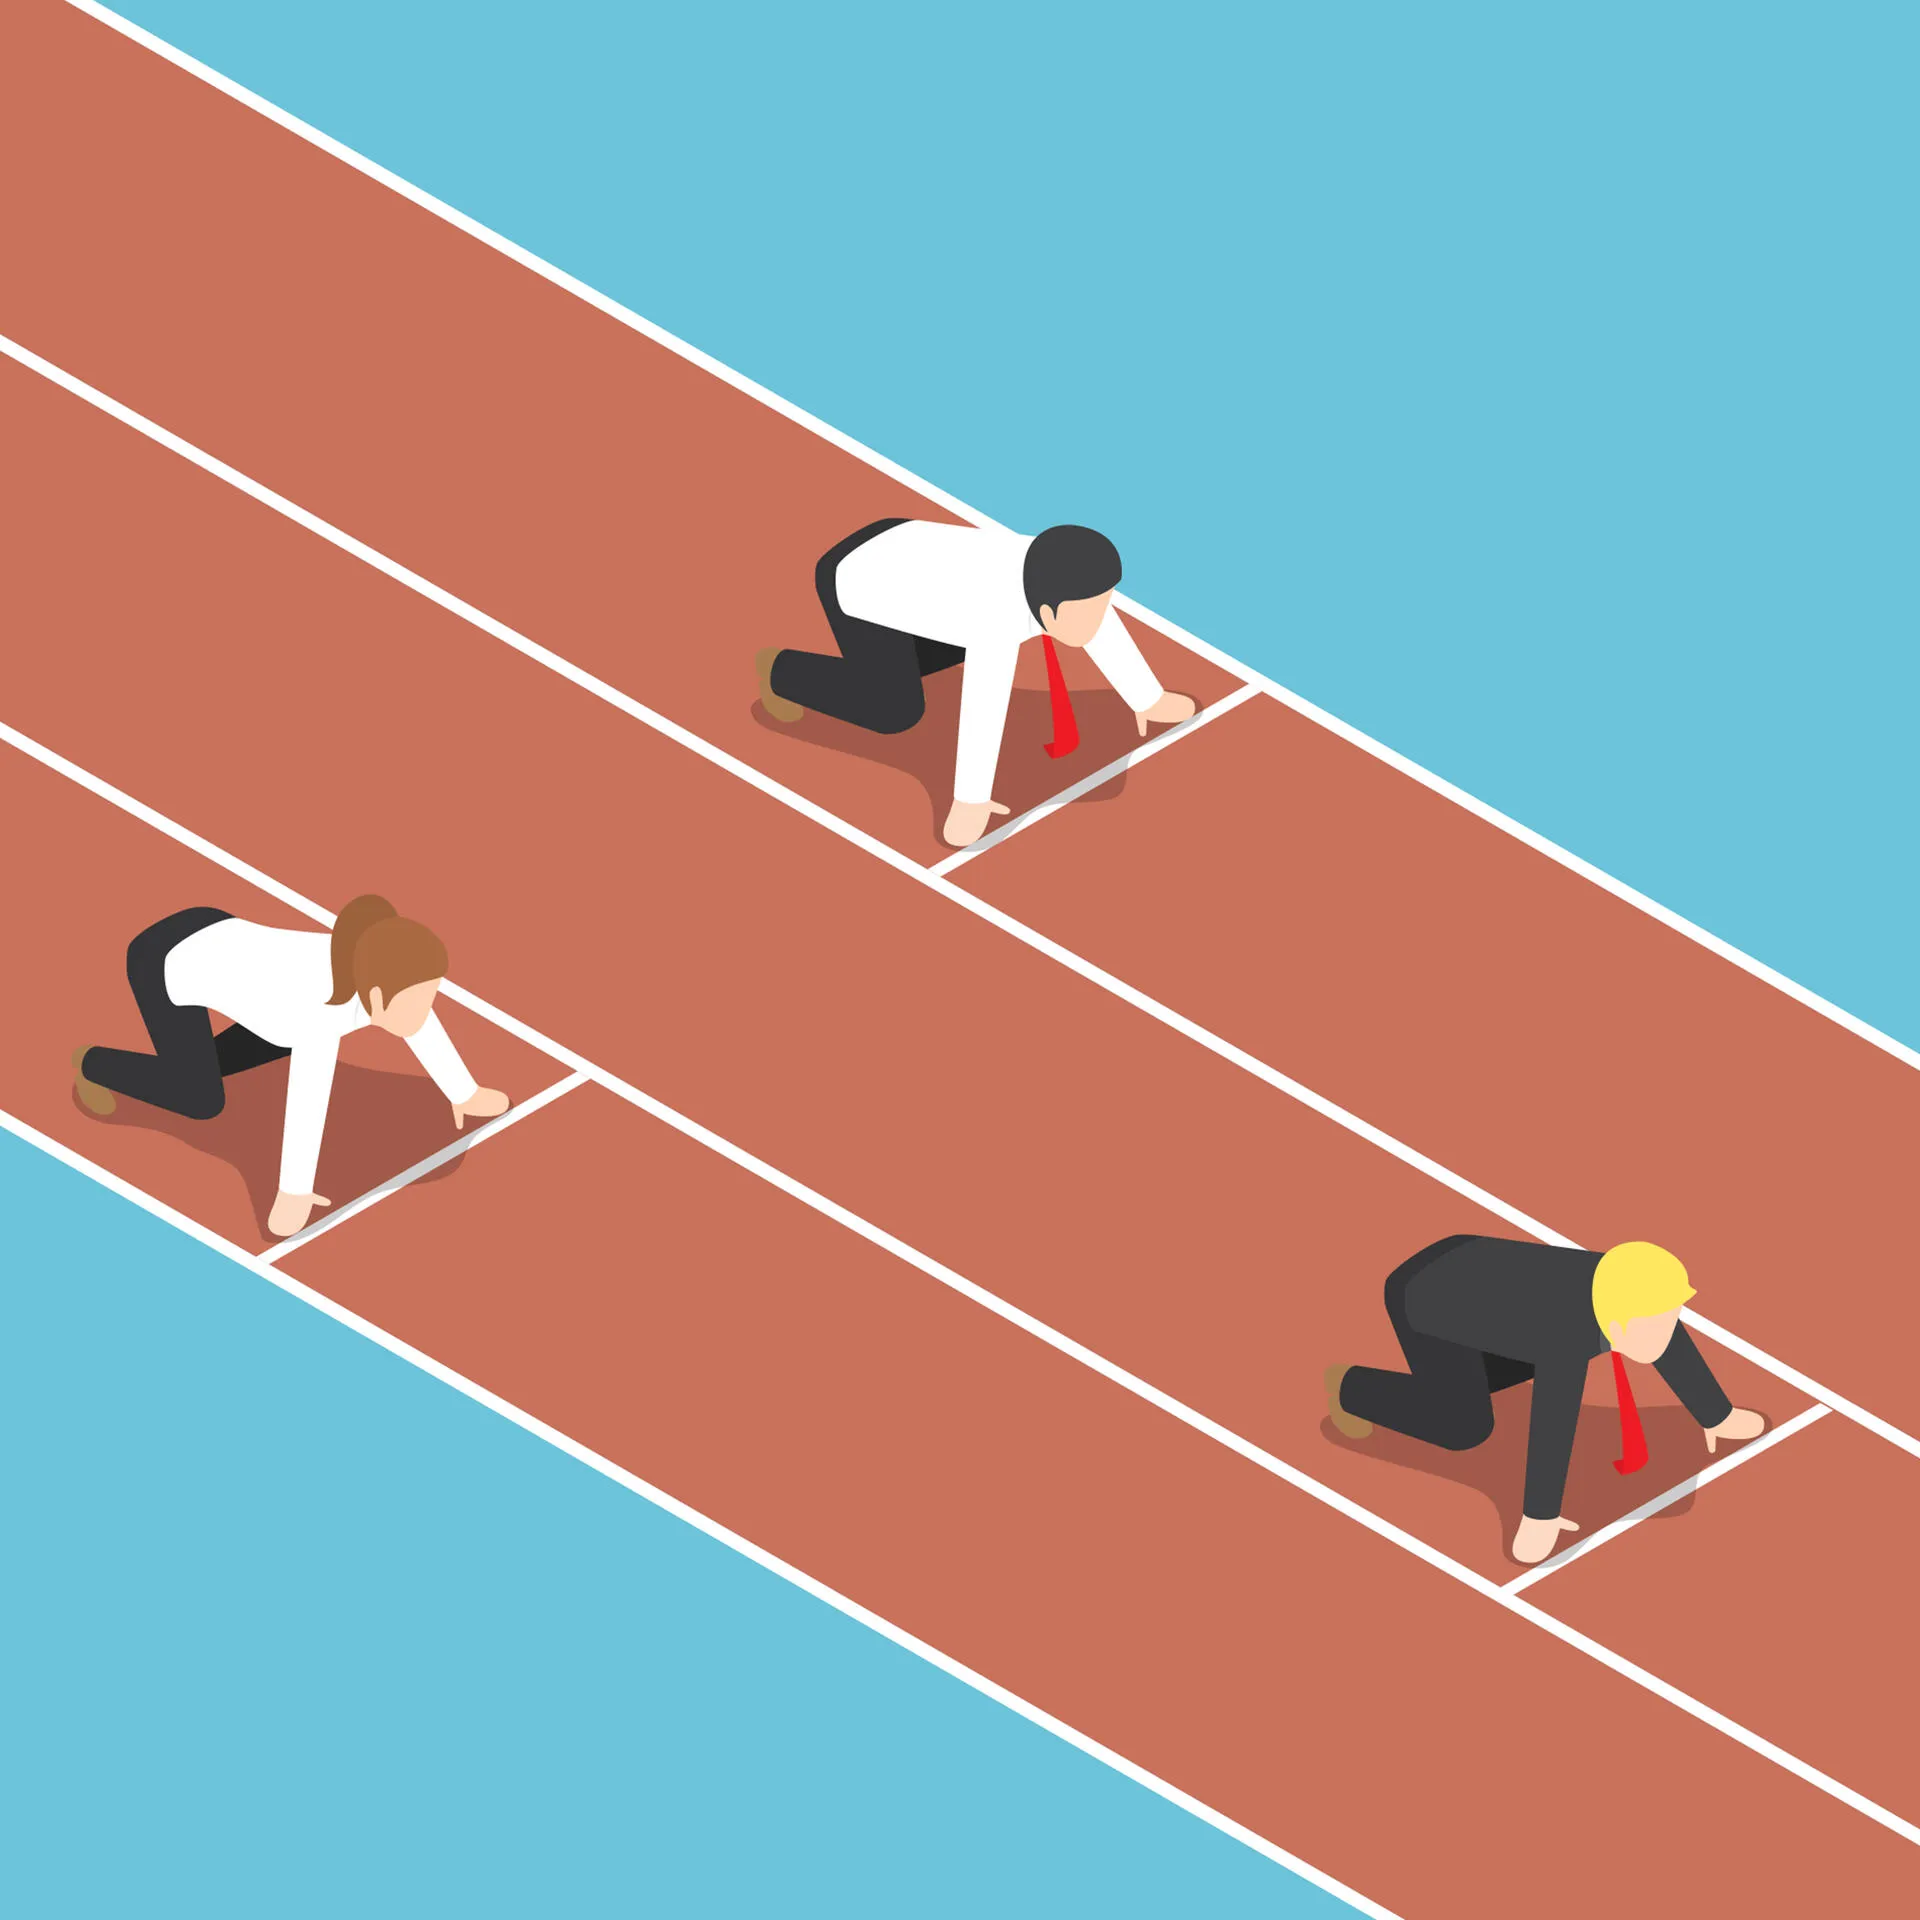 An illustration of runners at the starting line of a track, with one runner placed ahead of the others.